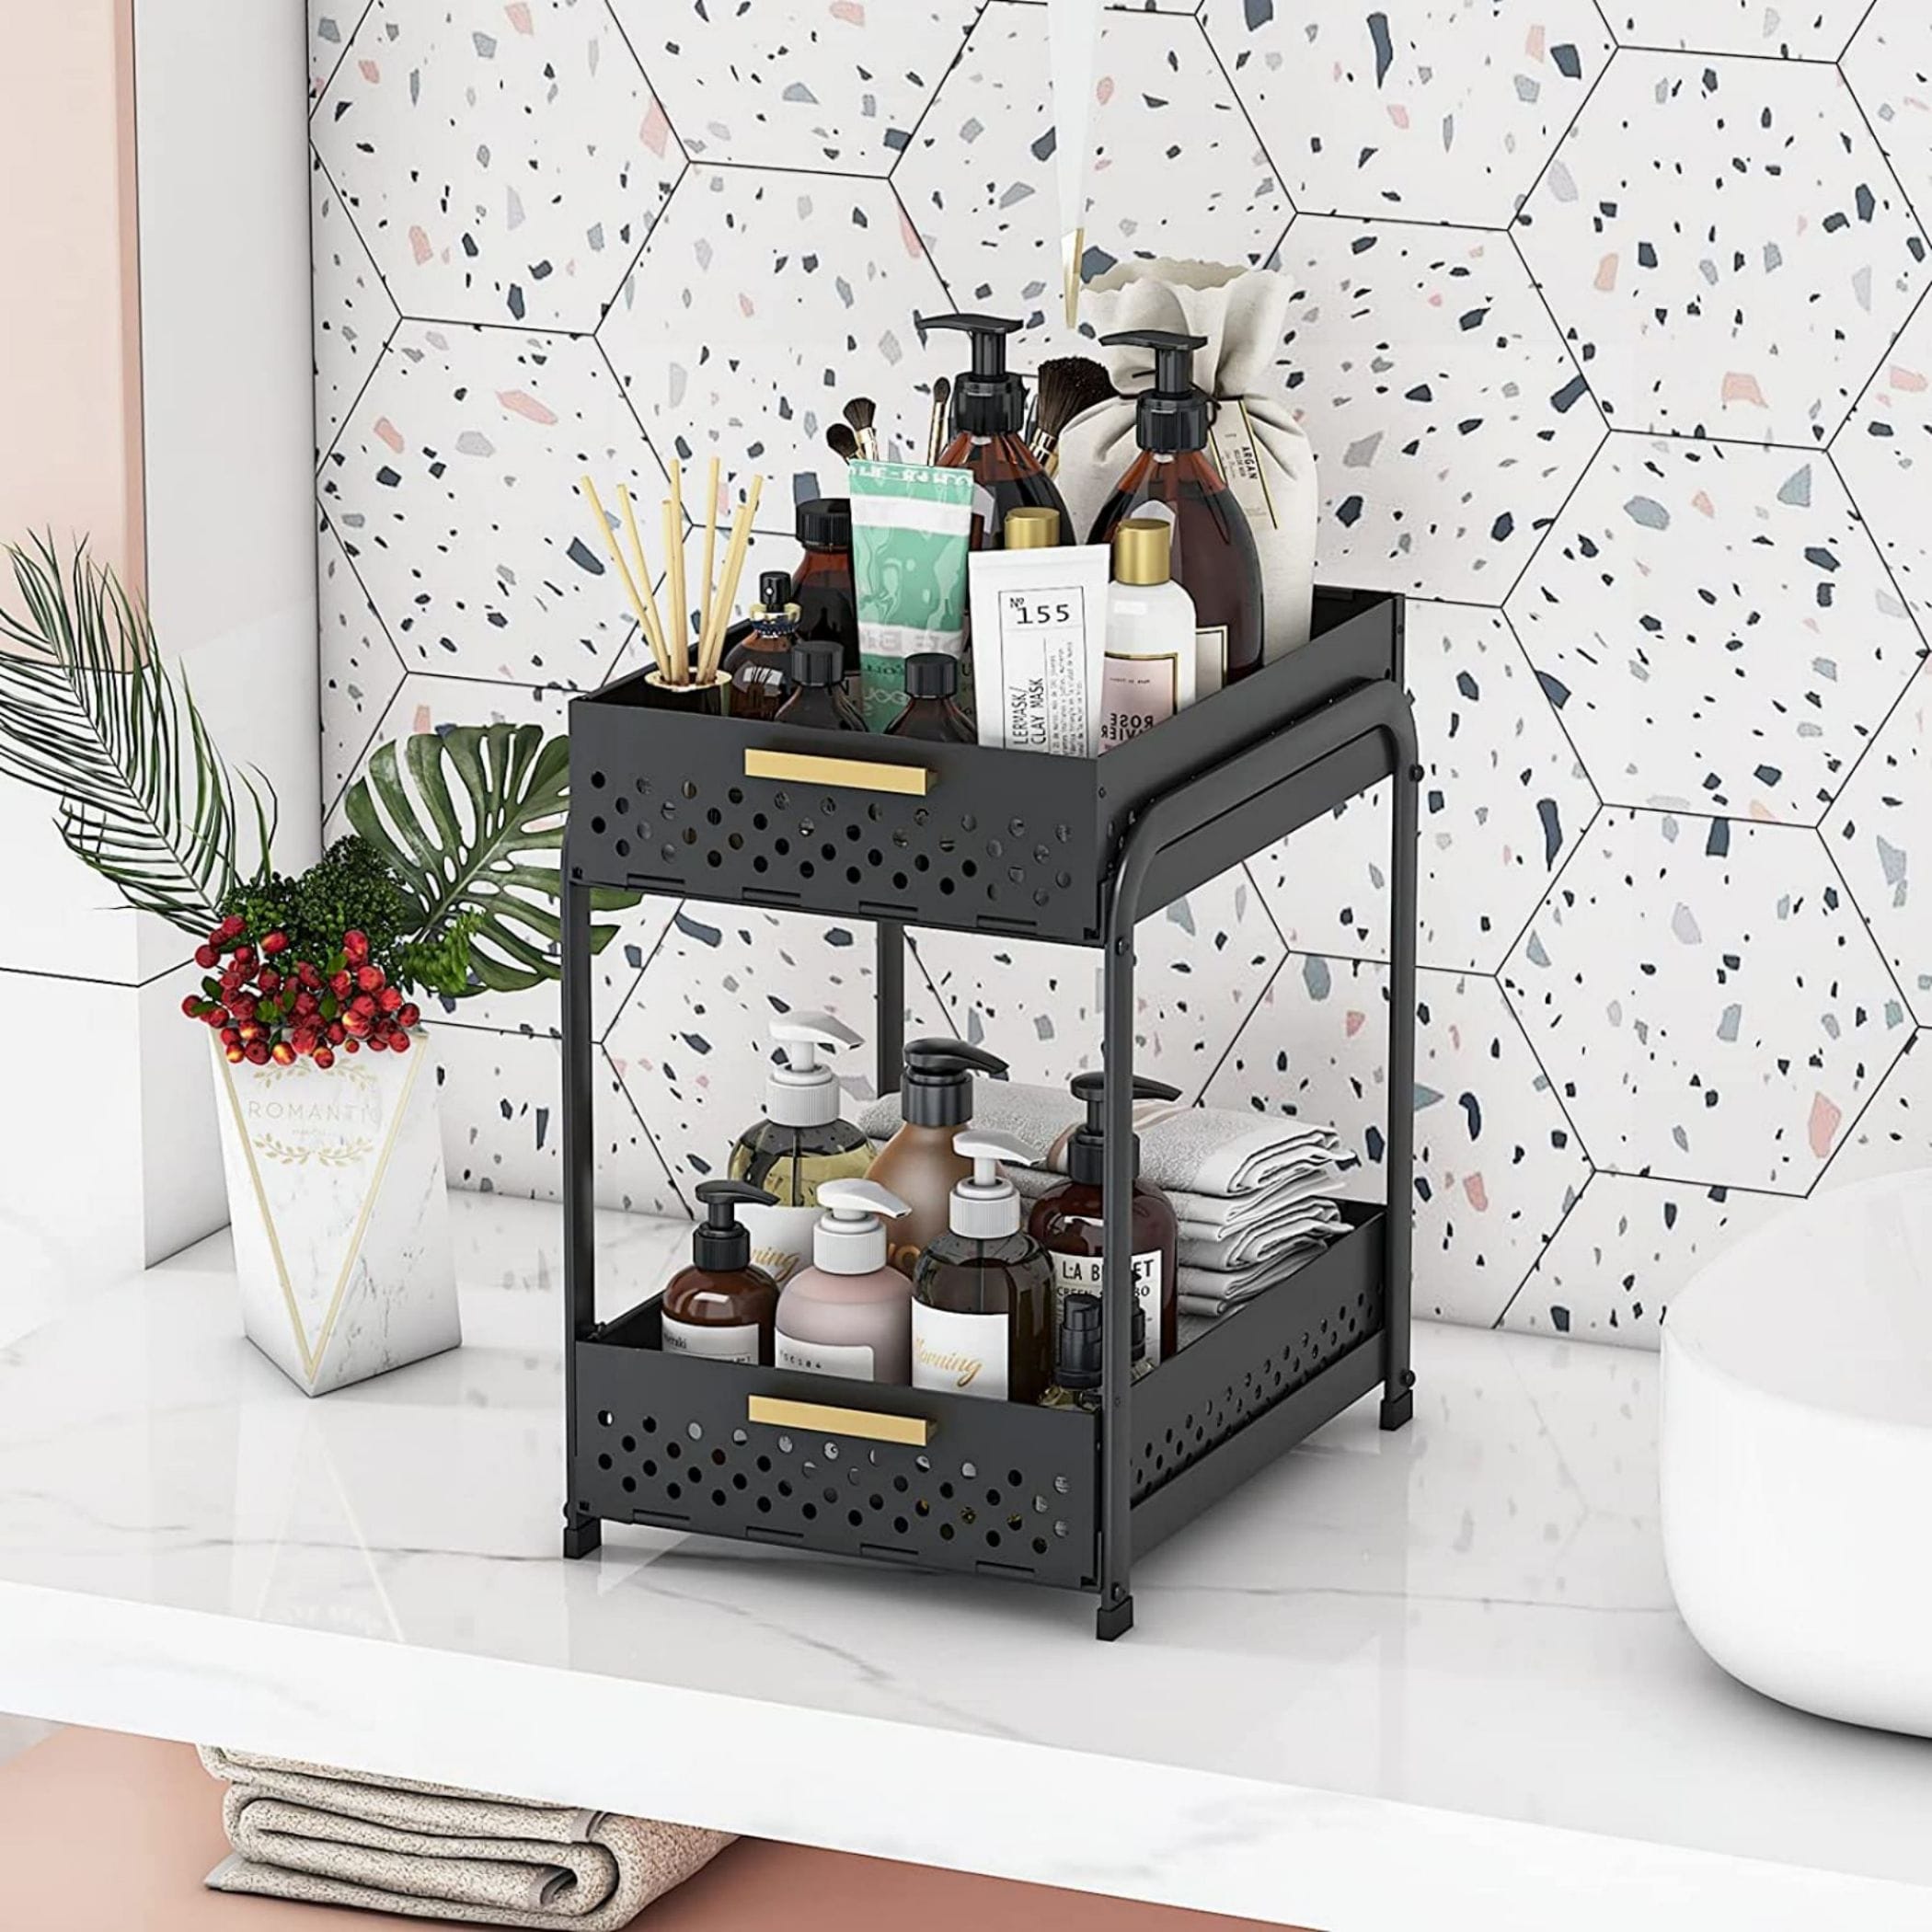 https://ak1.ostkcdn.com/images/products/is/images/direct/4930a80238d2ebc92b5021051f5b02f33fd89124/Double-Under-Sink-Storage-Rack-Kitchen-Under-Counter-Storage-Rack.jpg